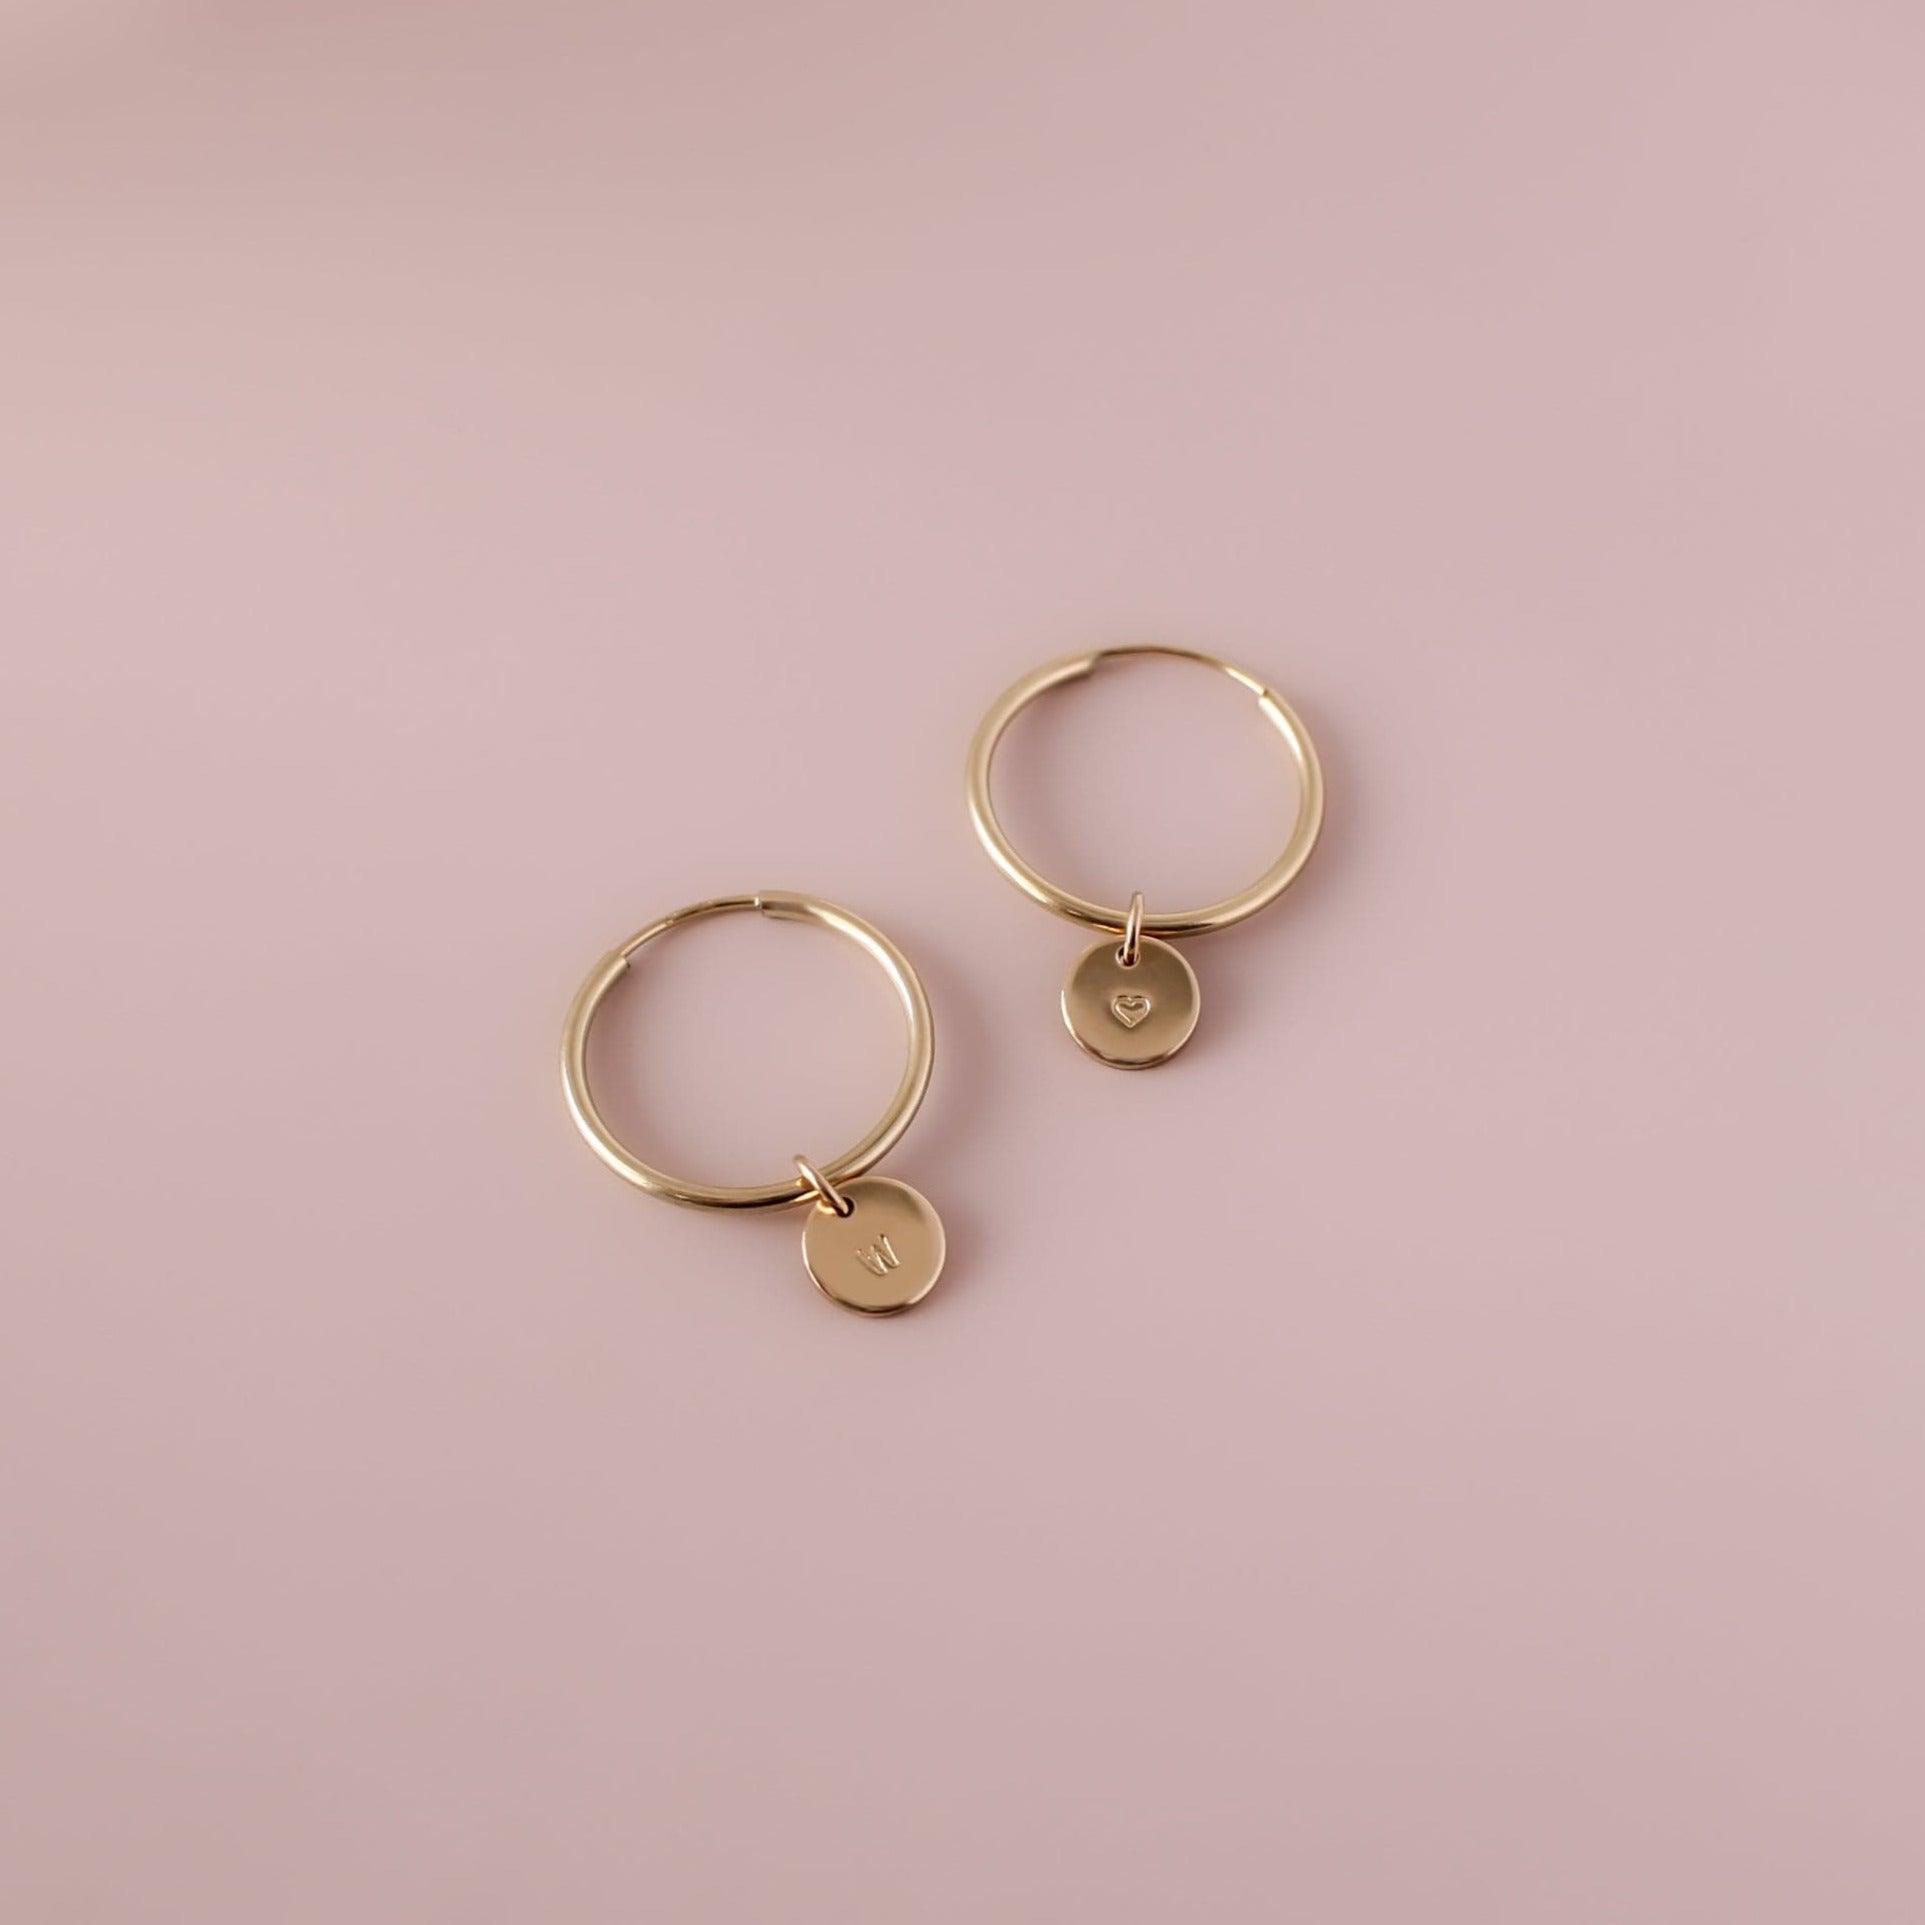 Personalized Disc Hoop Earrings - Nolia Jewelry - Meaningful + Sustainably Handcrafted Jewelry